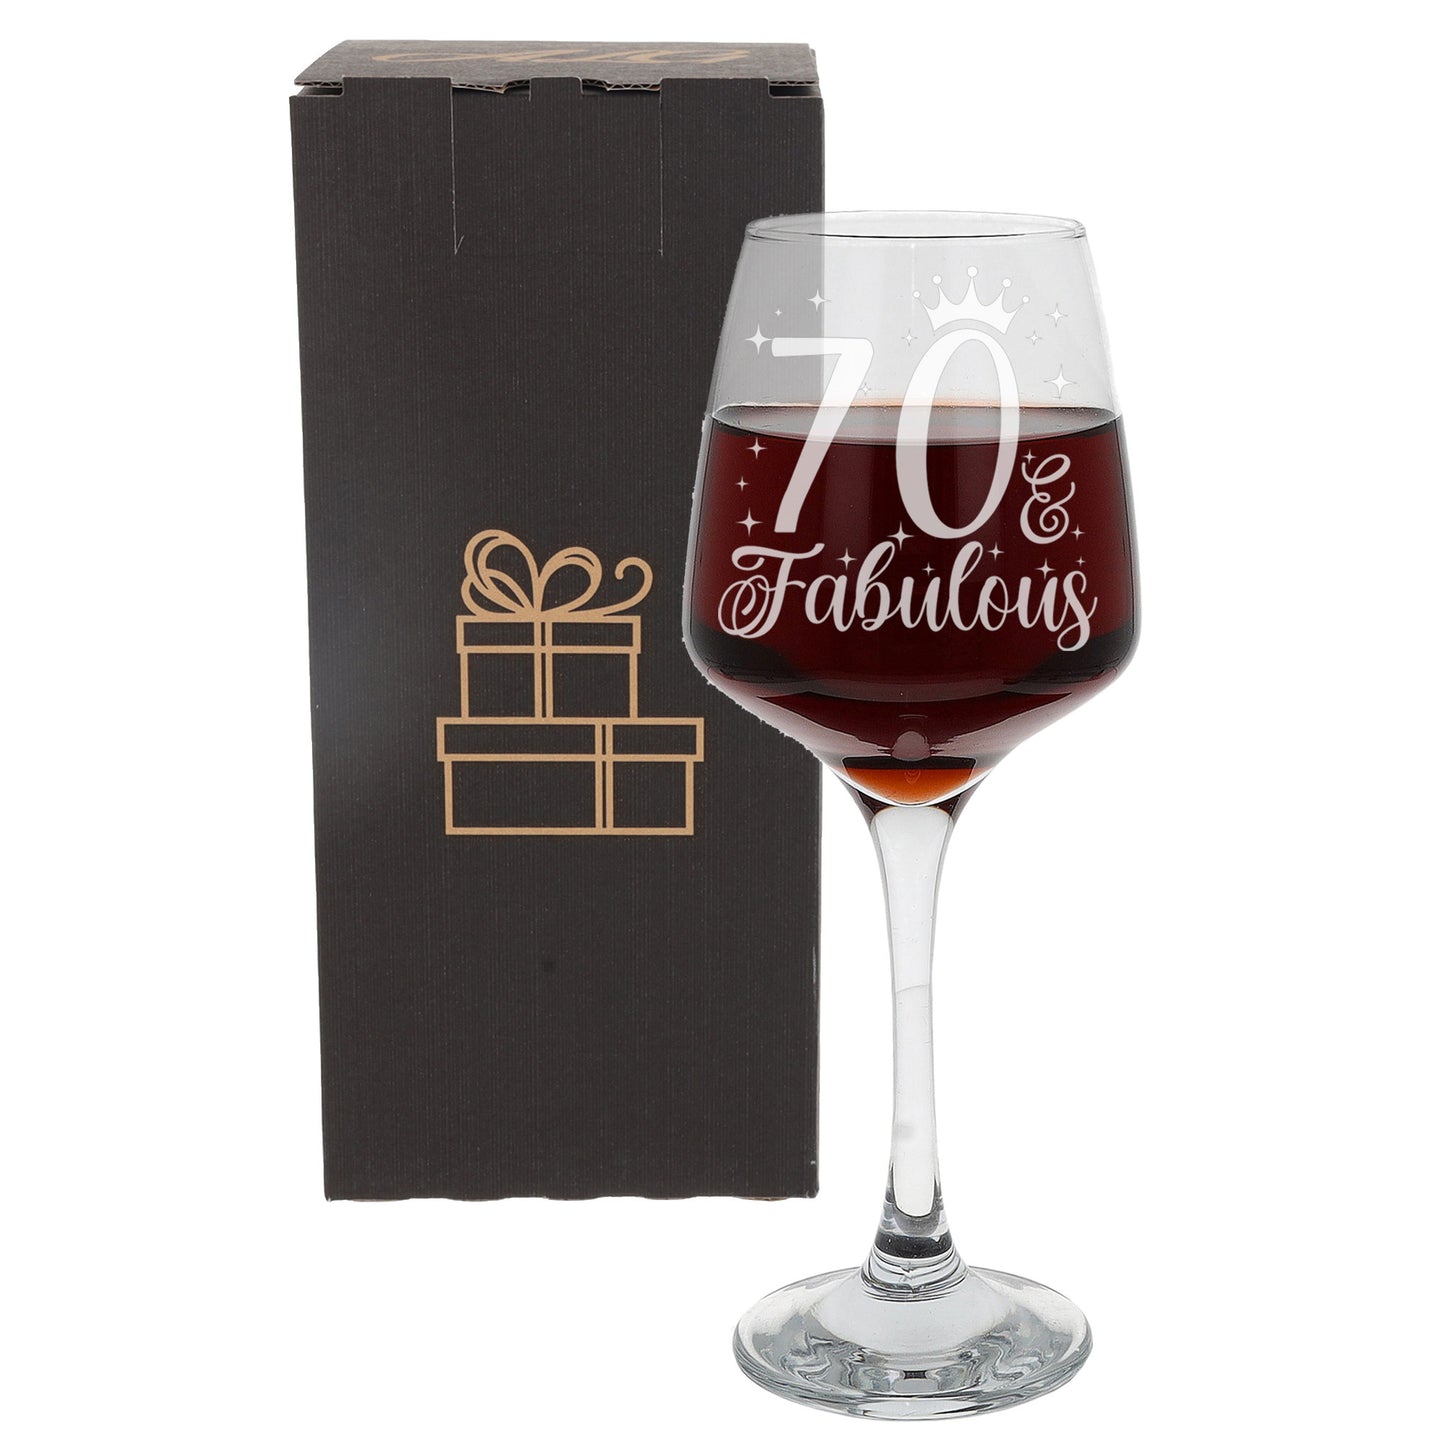 70 & Fabulous 70th Birthday Gift Engraved Wine Glass and/or Coaster Set  - Always Looking Good -   